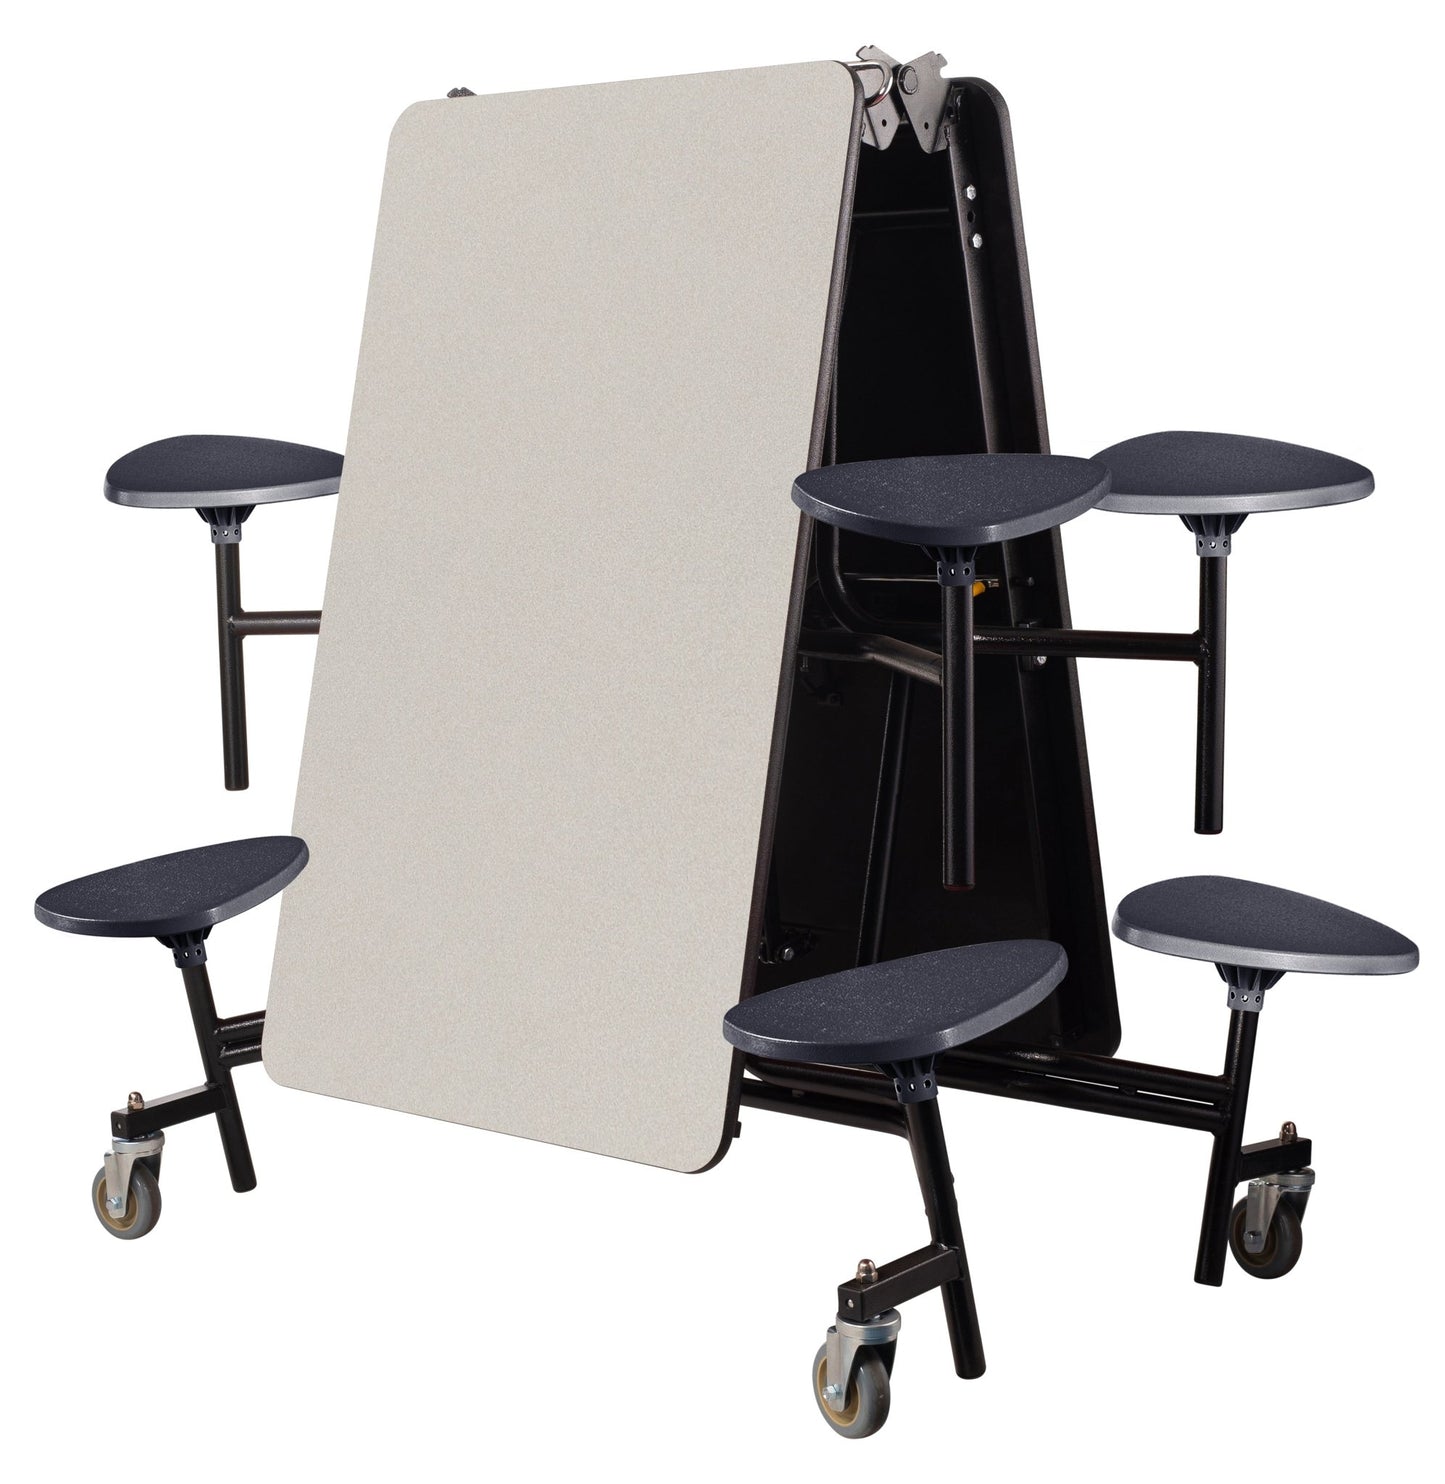 NPS Mobile Cafeteria Table - 30" W x 8' L - 8 Stools - MDF Core - Protect Edge - Chrome Frame - SchoolOutlet